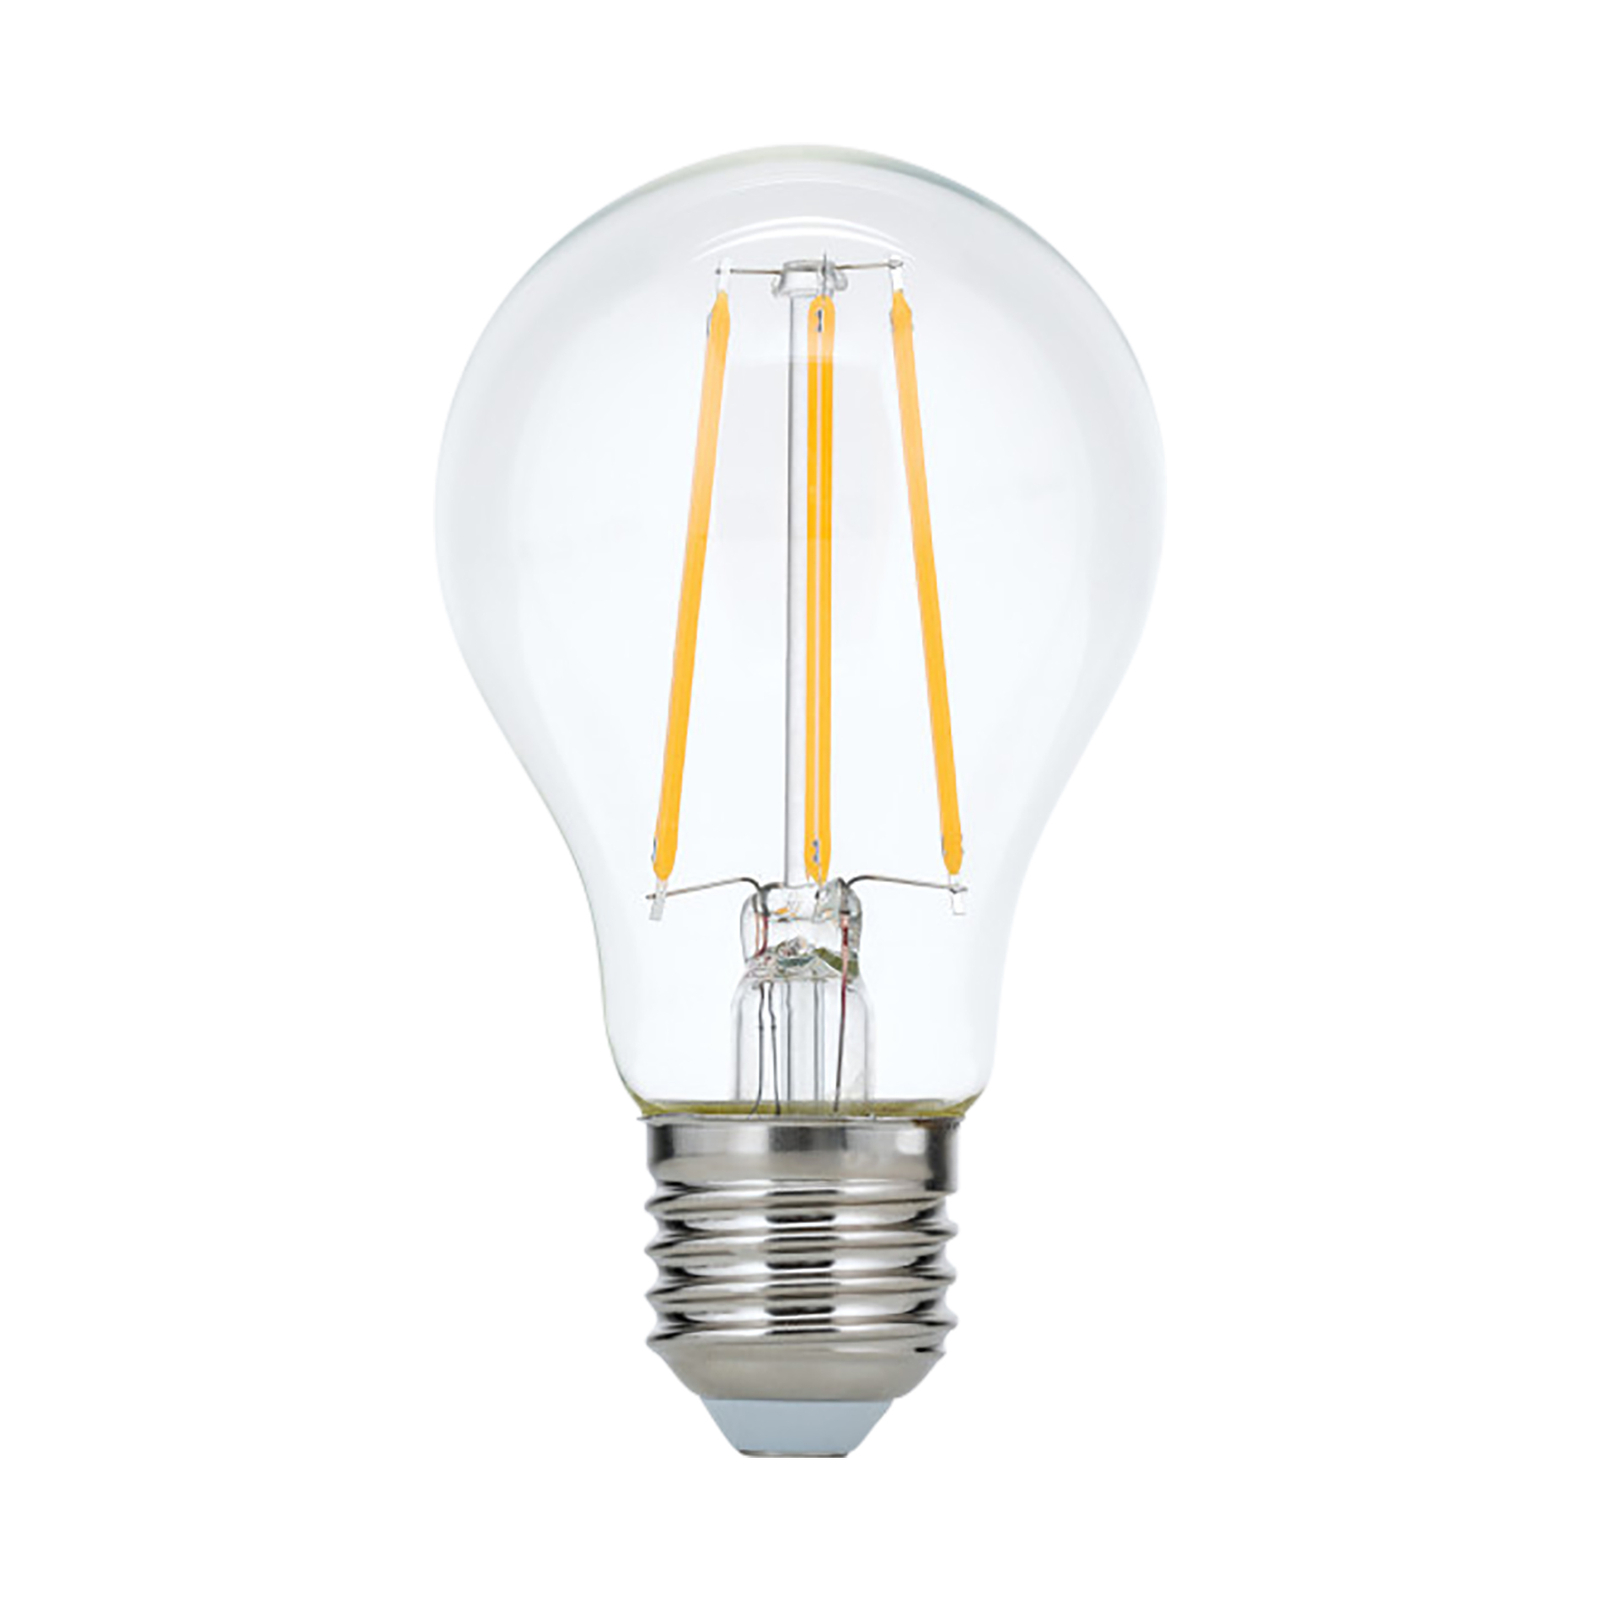 LED bulb E27 10 W 2,700 K filament clear dimmable